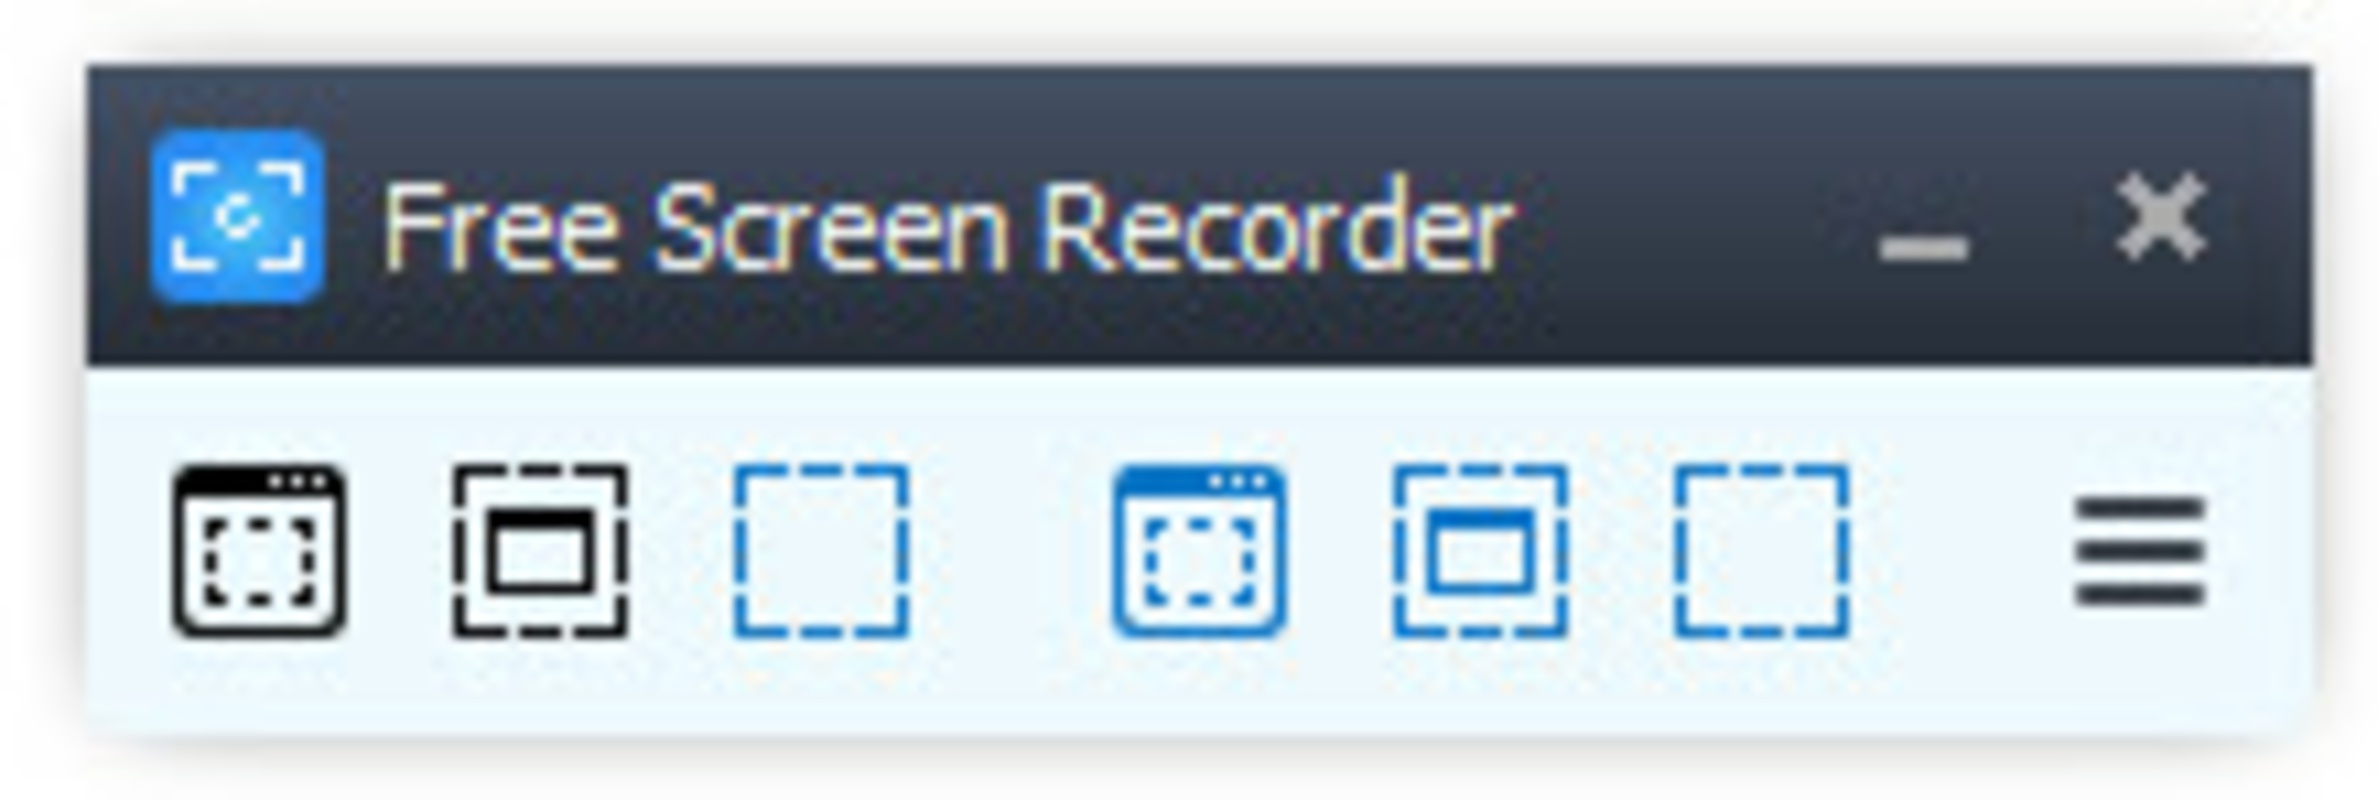 Free Screen Recorder 3.1.1.1024 feature